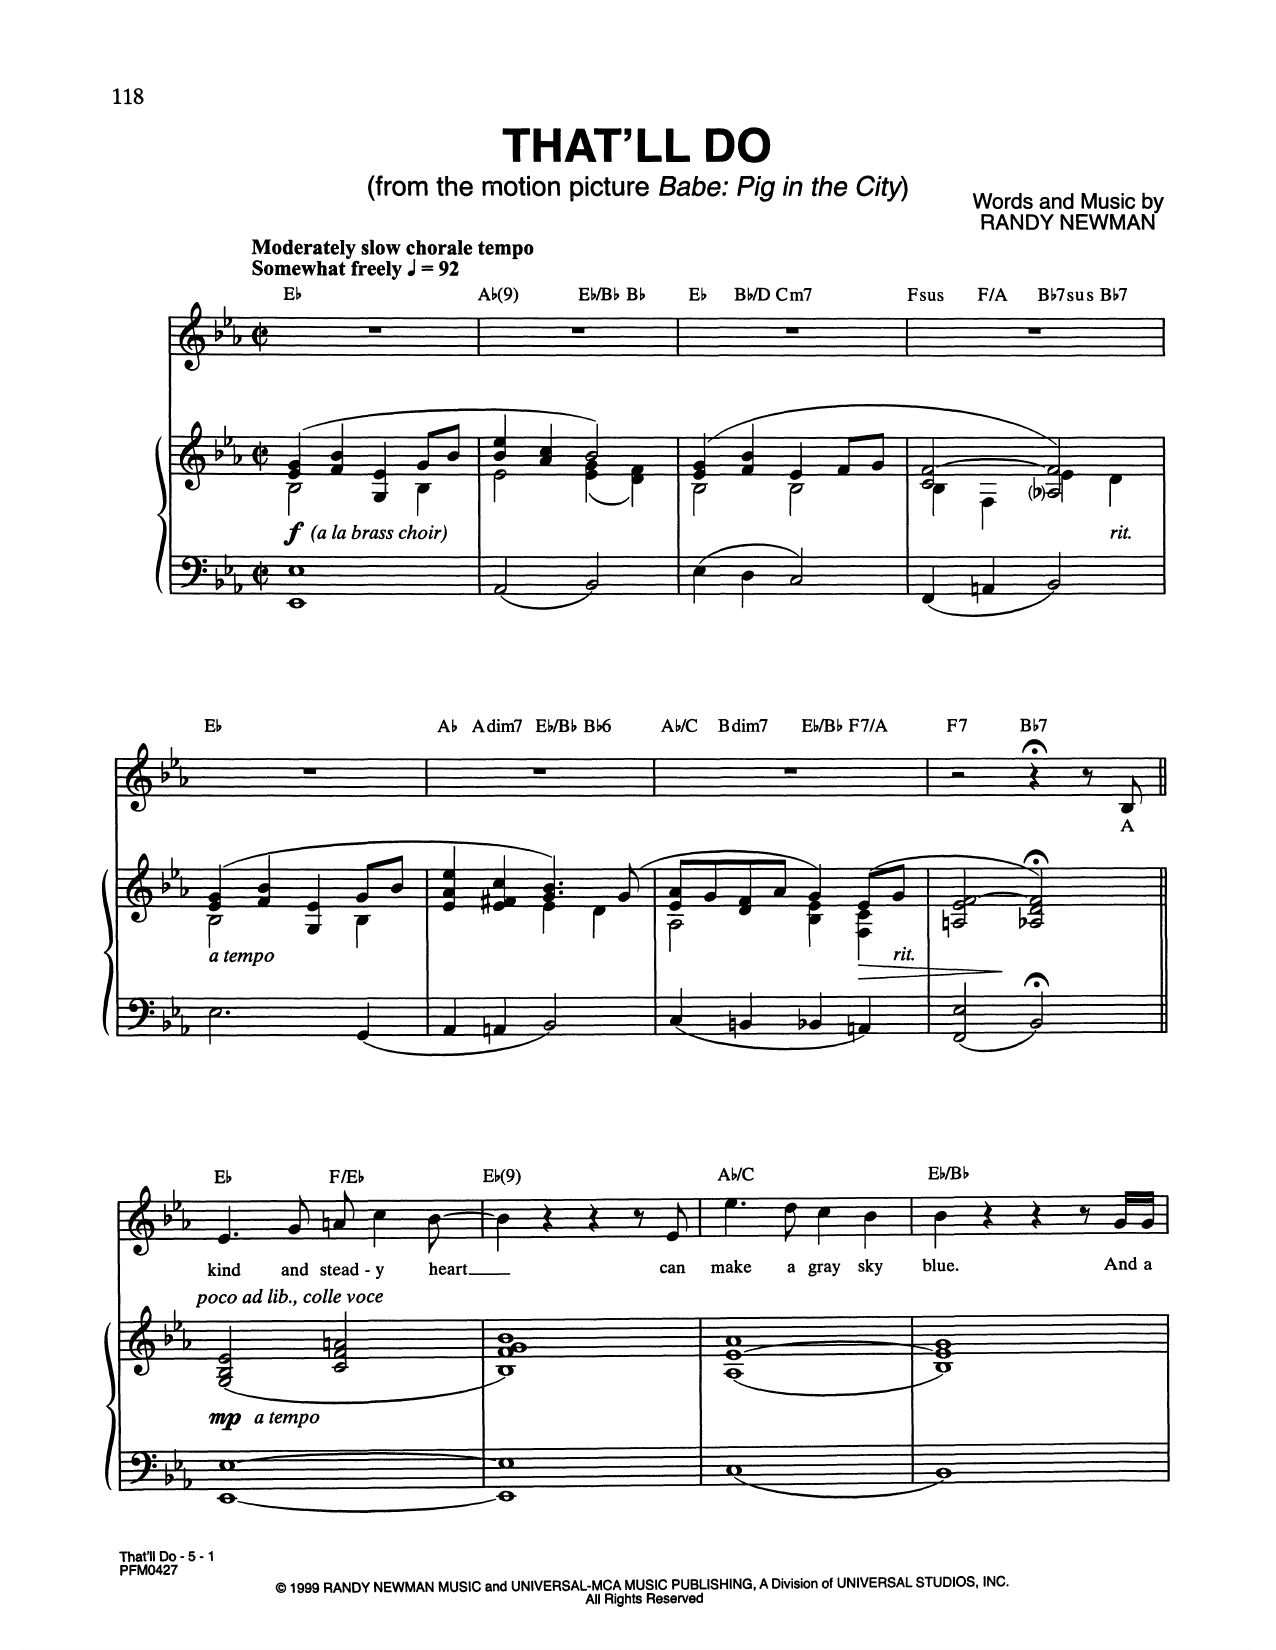 Download Peter Gabriel feat. Paddy Maloney & That'll Do (from Babe: Pig In The City) Sheet Music